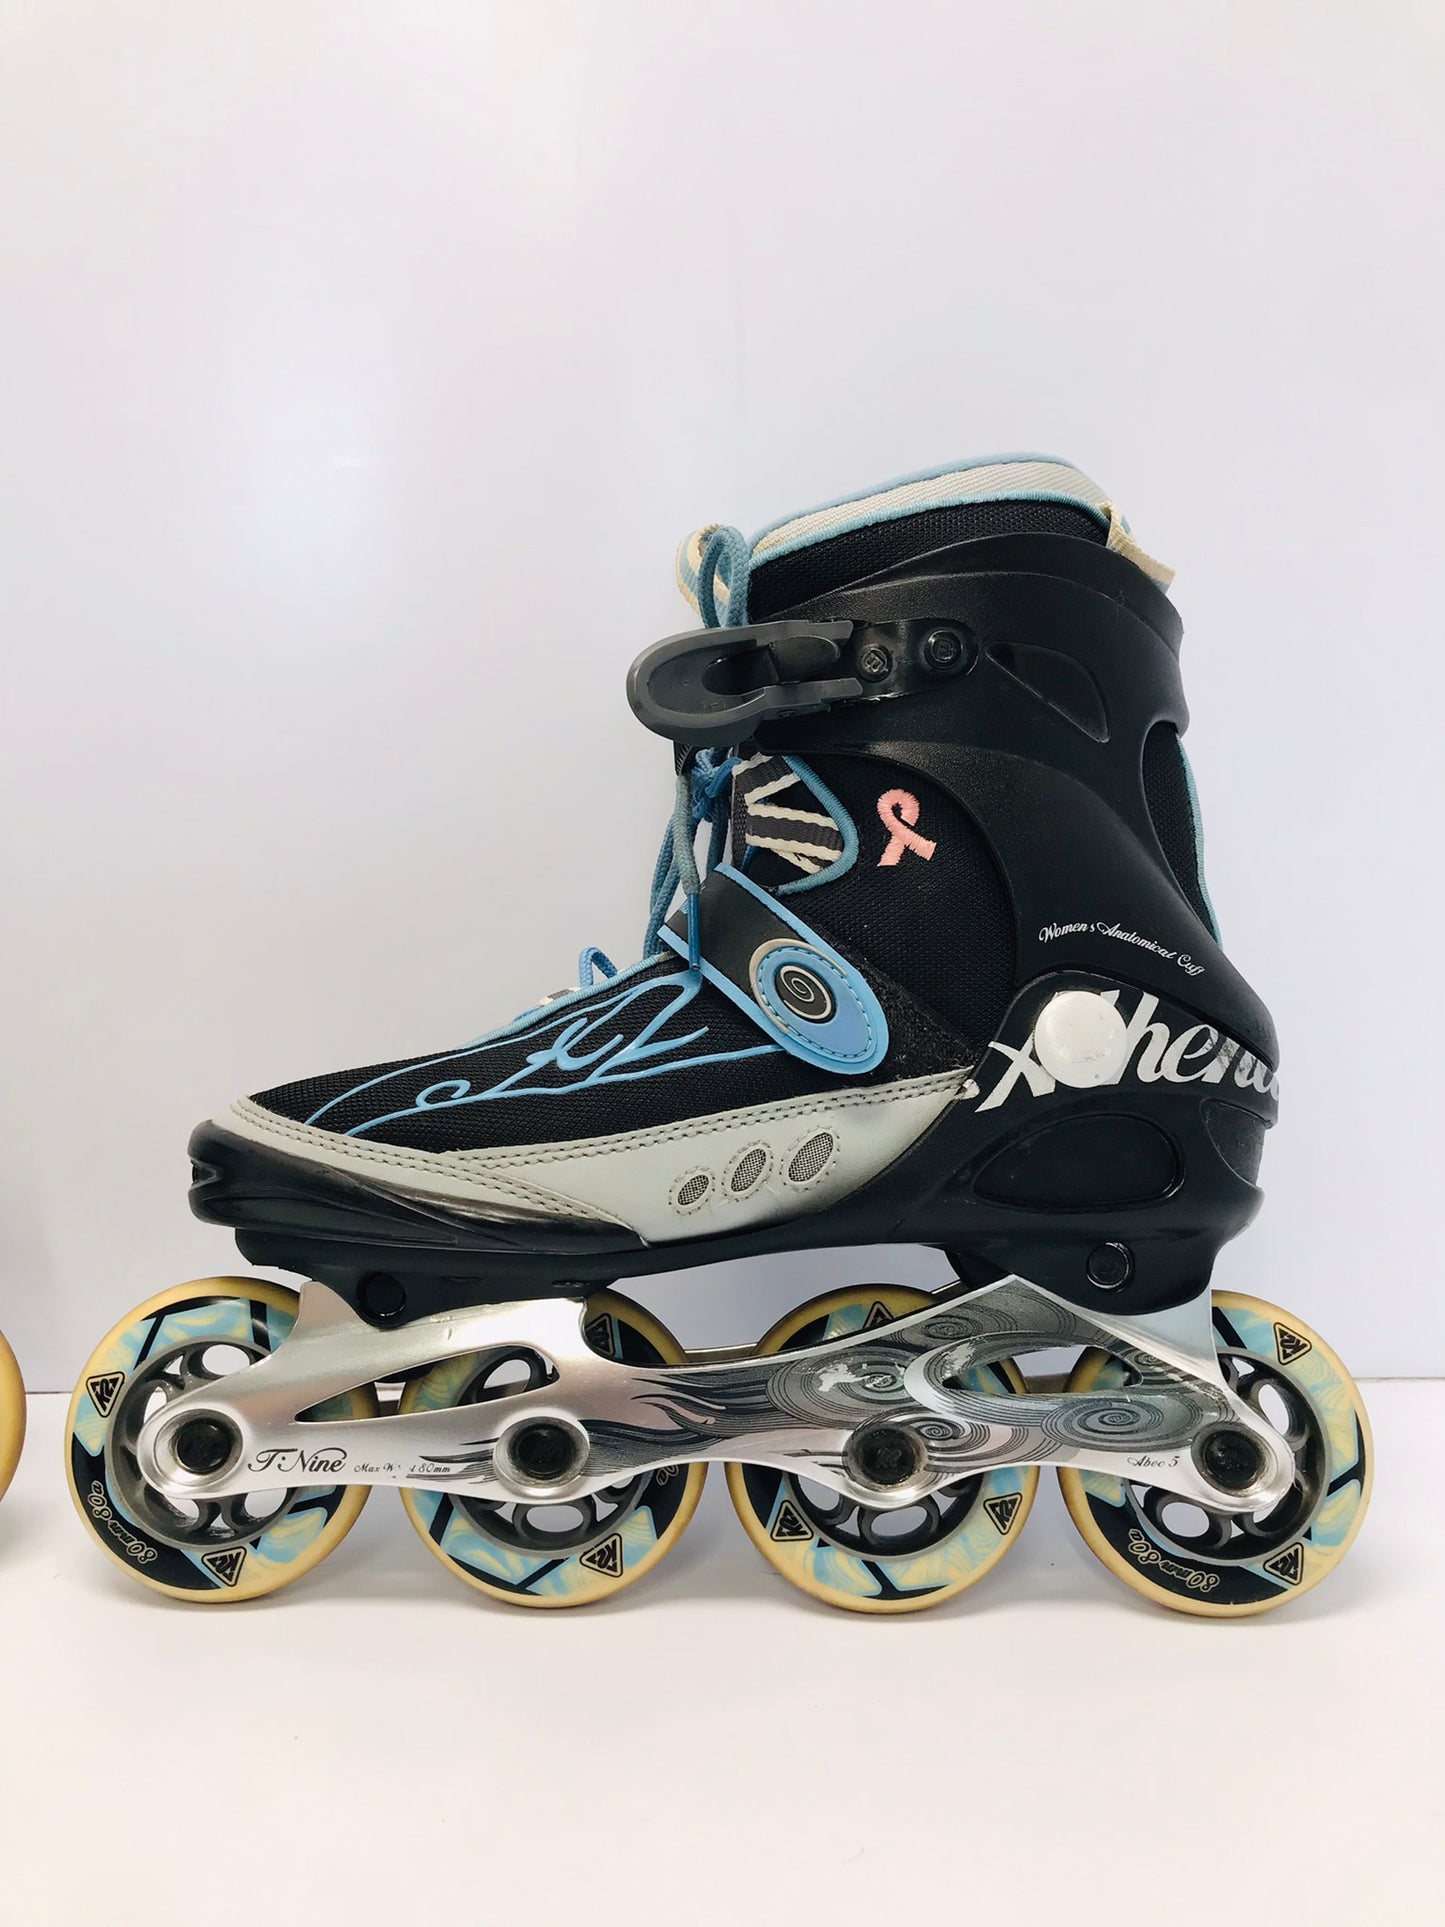 Inline Roller Skates Ladies Size 7.5 K-2 Black Blue Excellent Condition and Quality